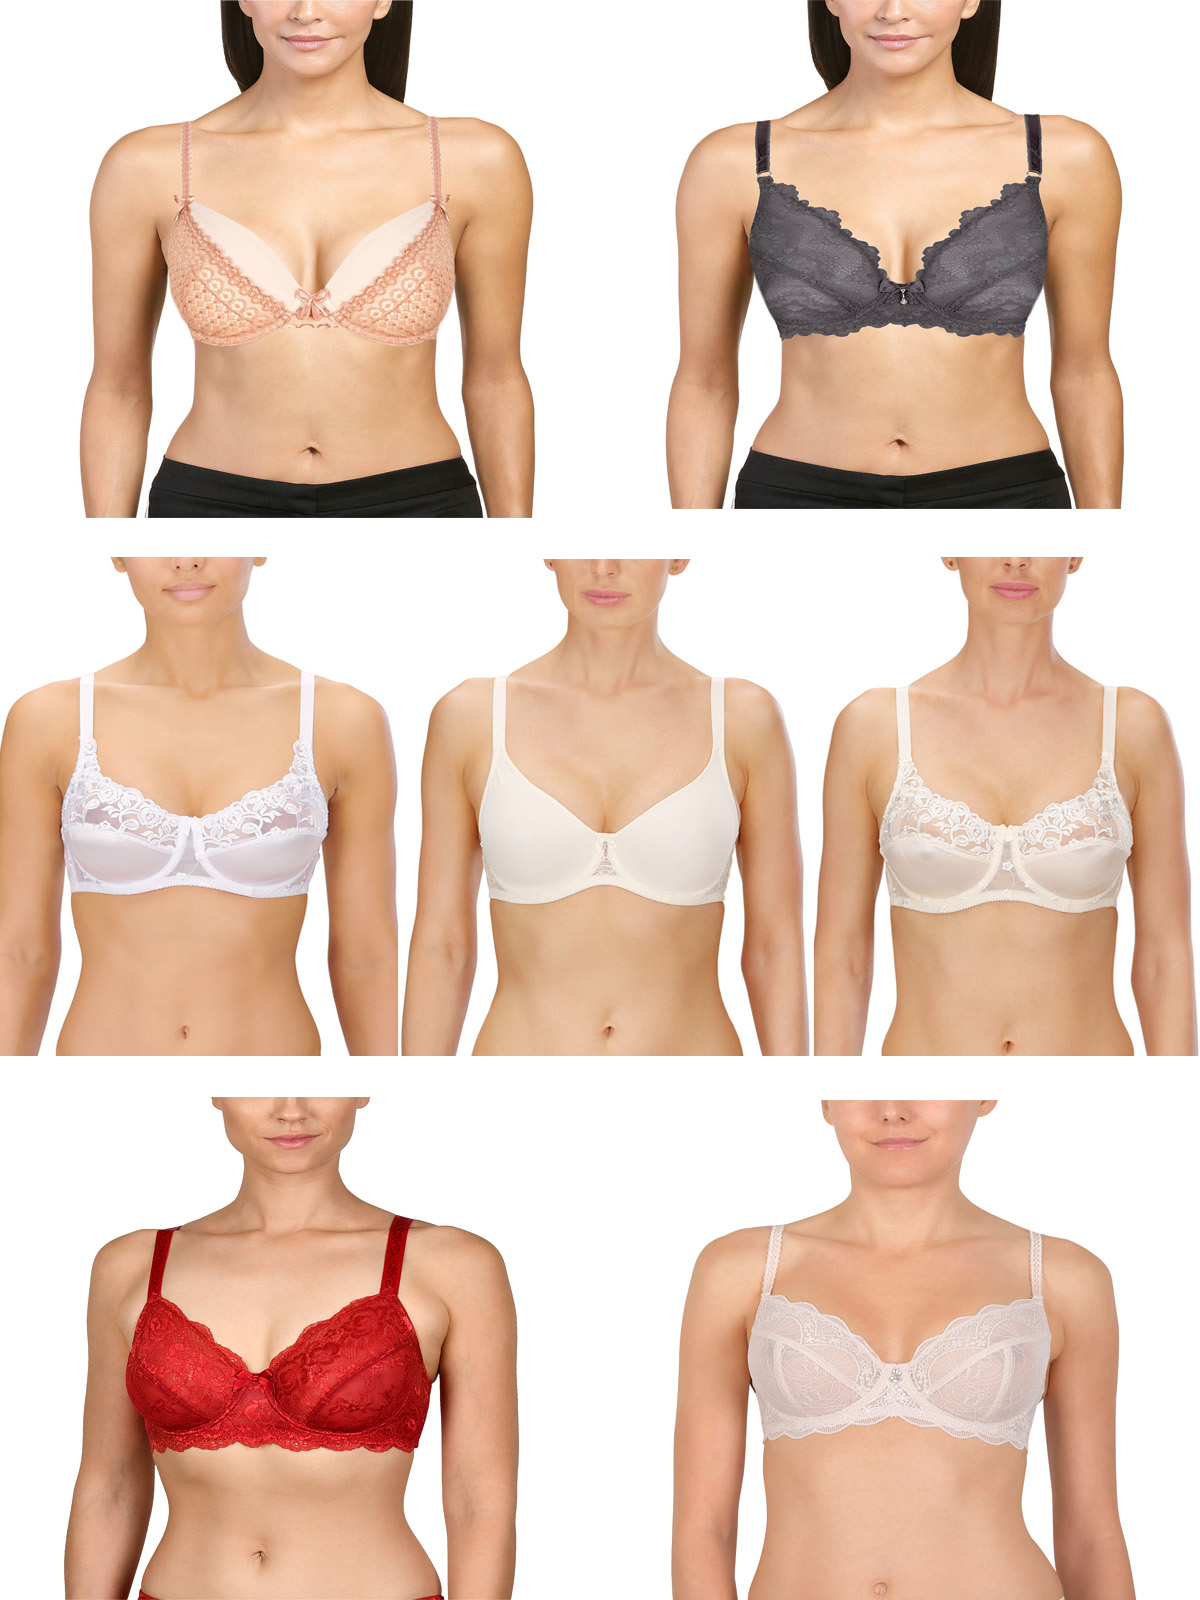 Ladies Soft Cup Bras by Naturana 86545 - Lord Wholesale Co